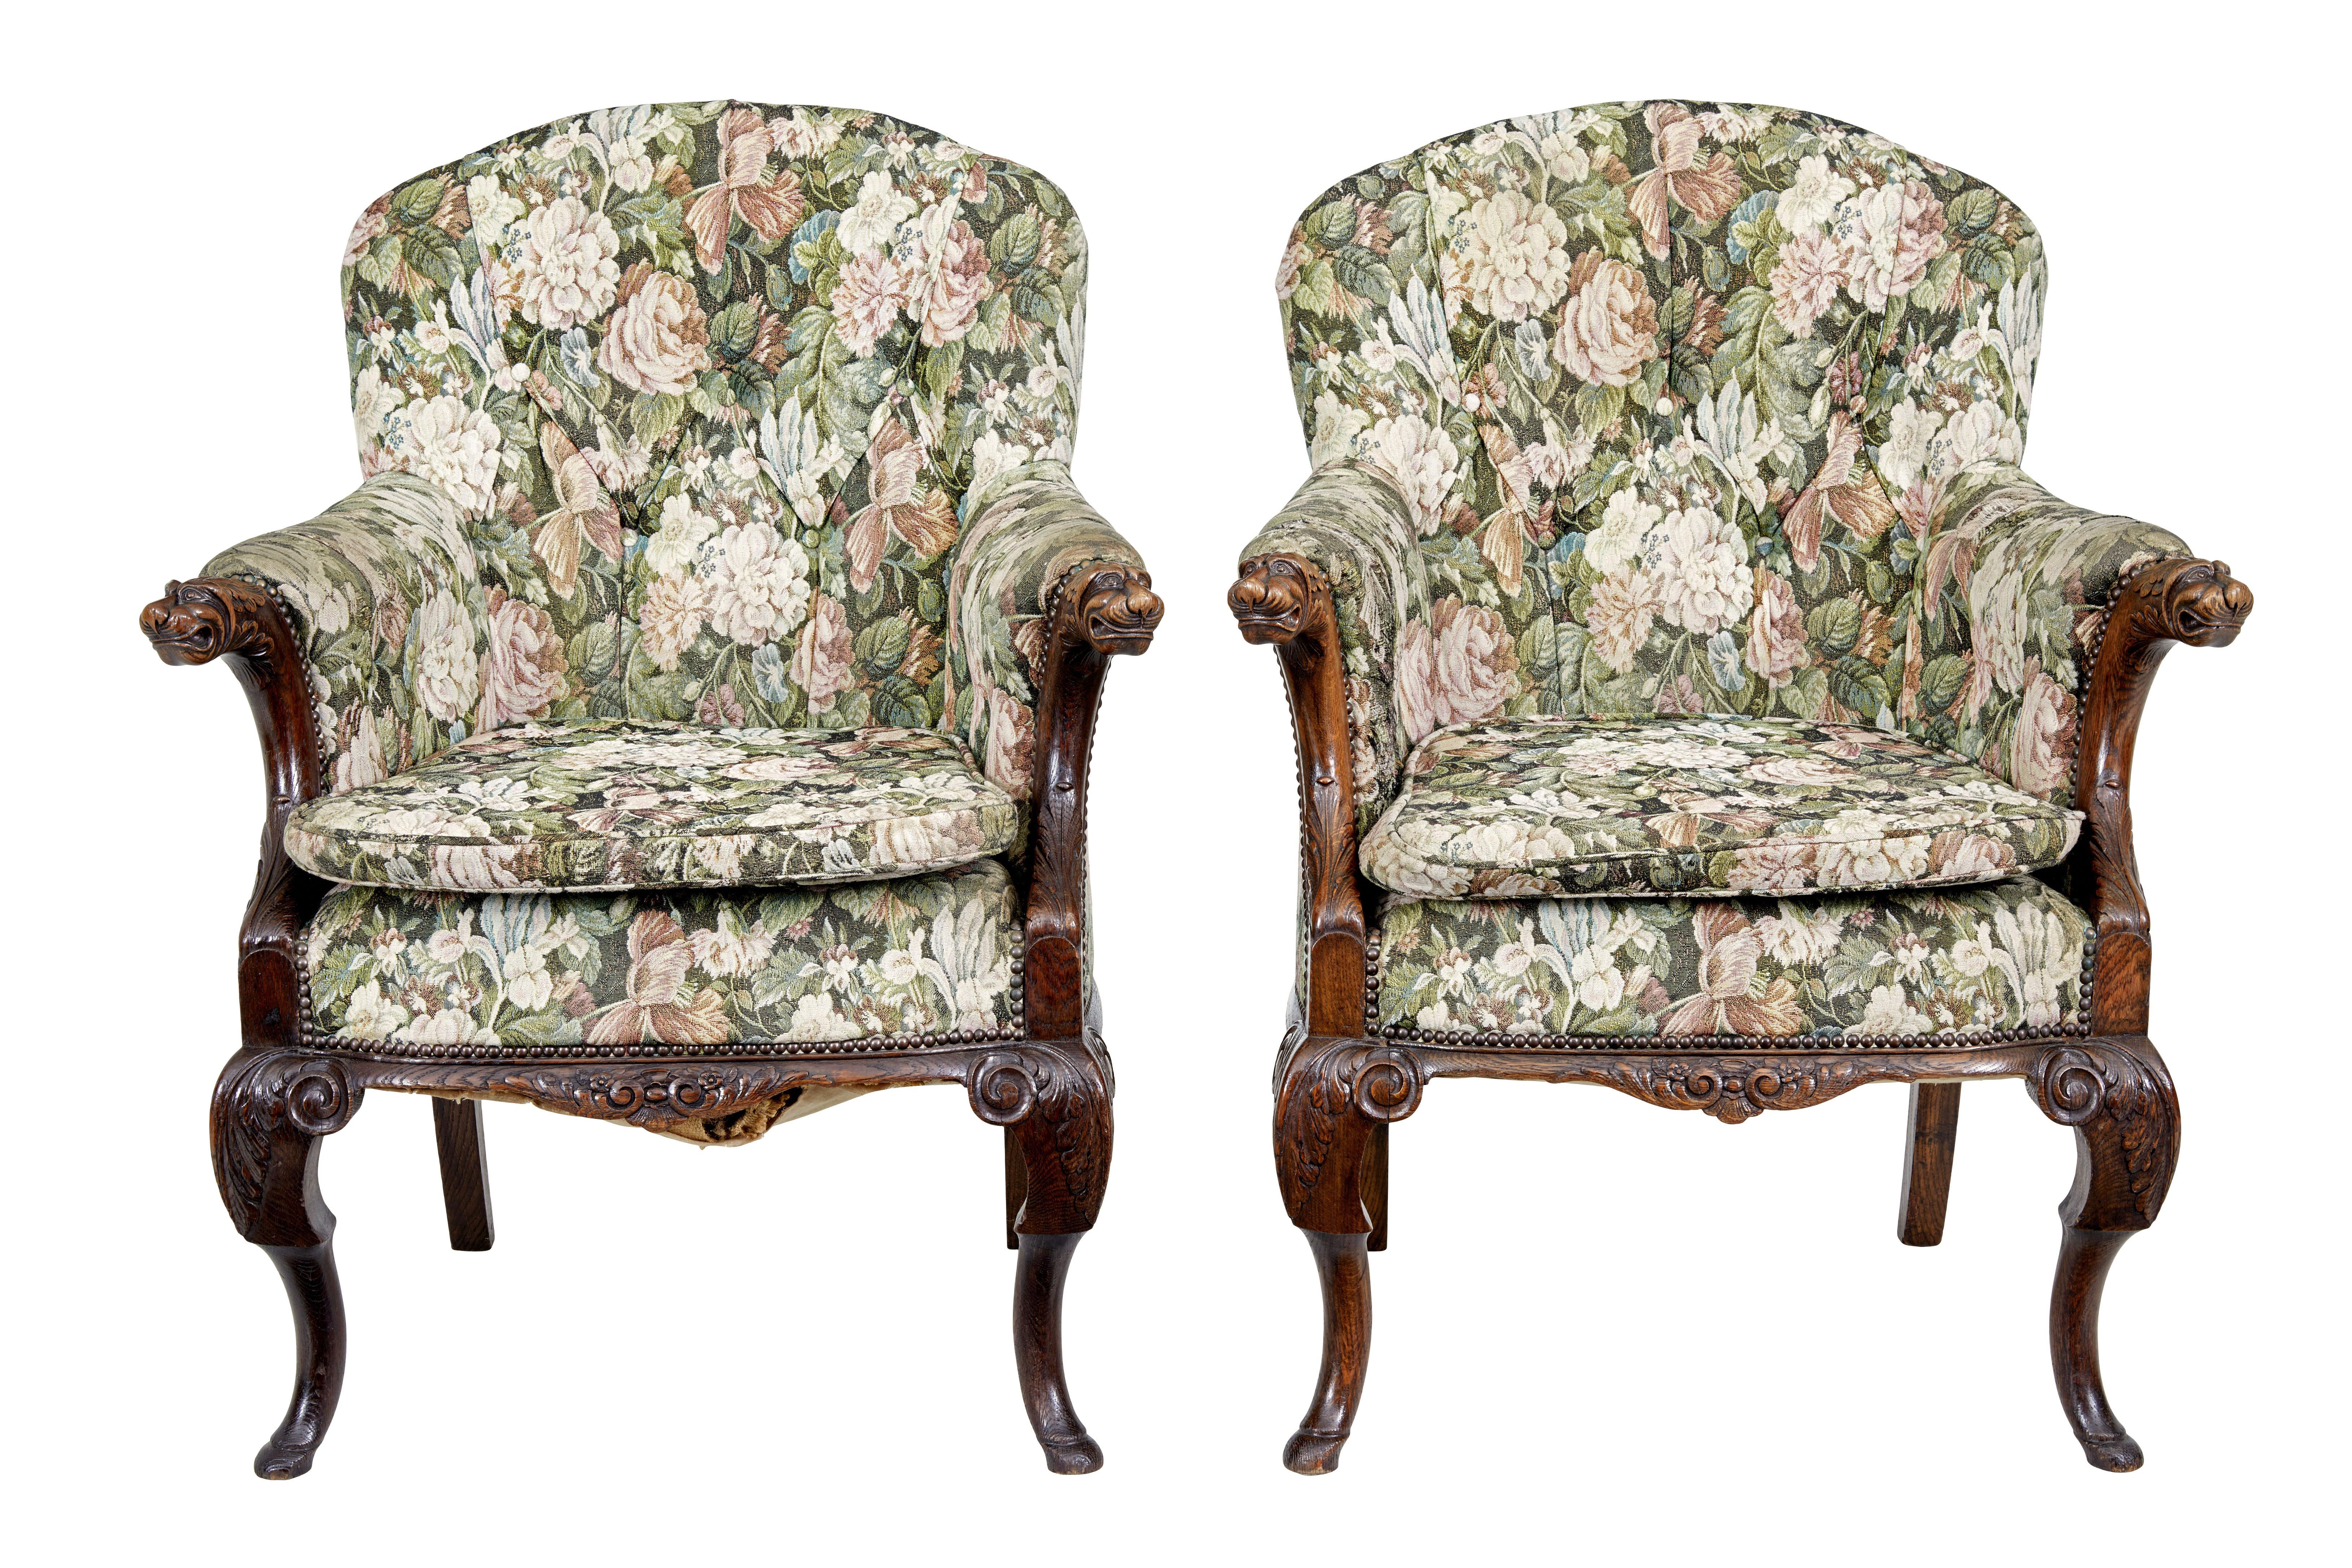 Pair of french 19th century carved oak armchairs circa 1870.

Fine quality pair of profusely carved armchairs.  Shaped backs with upholstered arms and a extra seat pad for added comfort.

Carved dogs and acanthus leaves to arms, further carving to